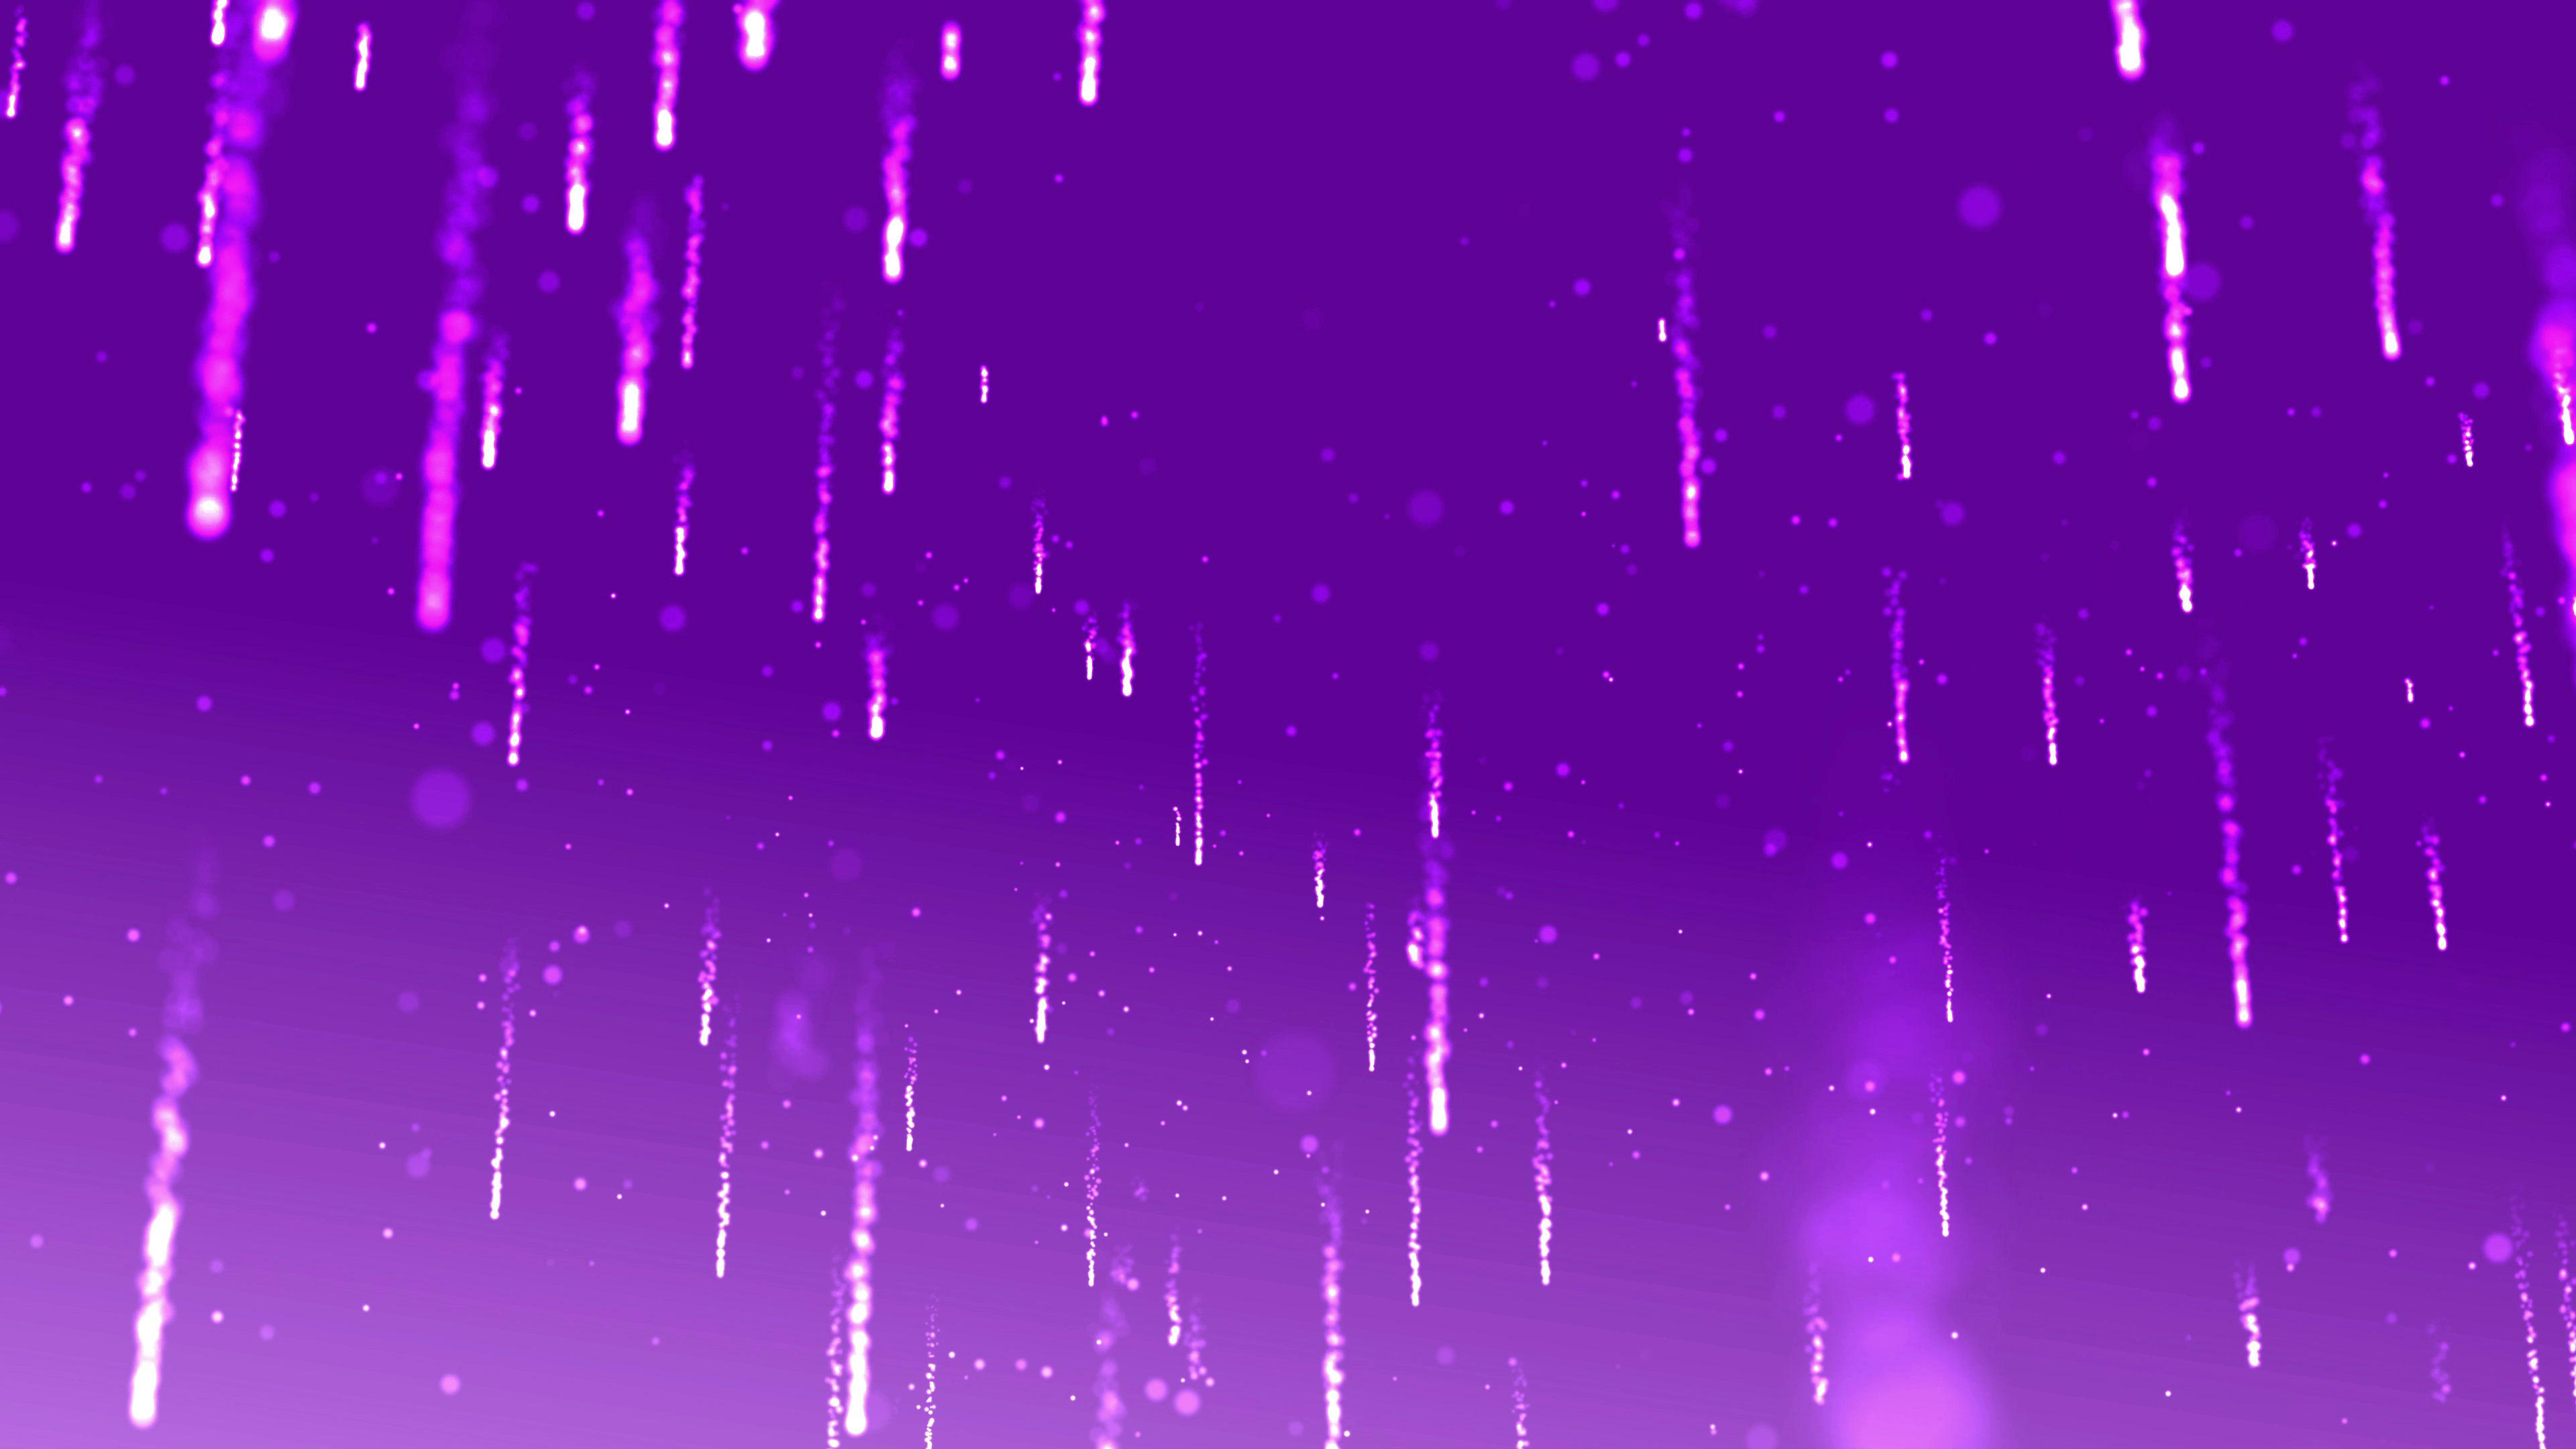 4K Beautiful Purple Particles Motion Background || VFX Free To Use 4K Screensaver || Free Download